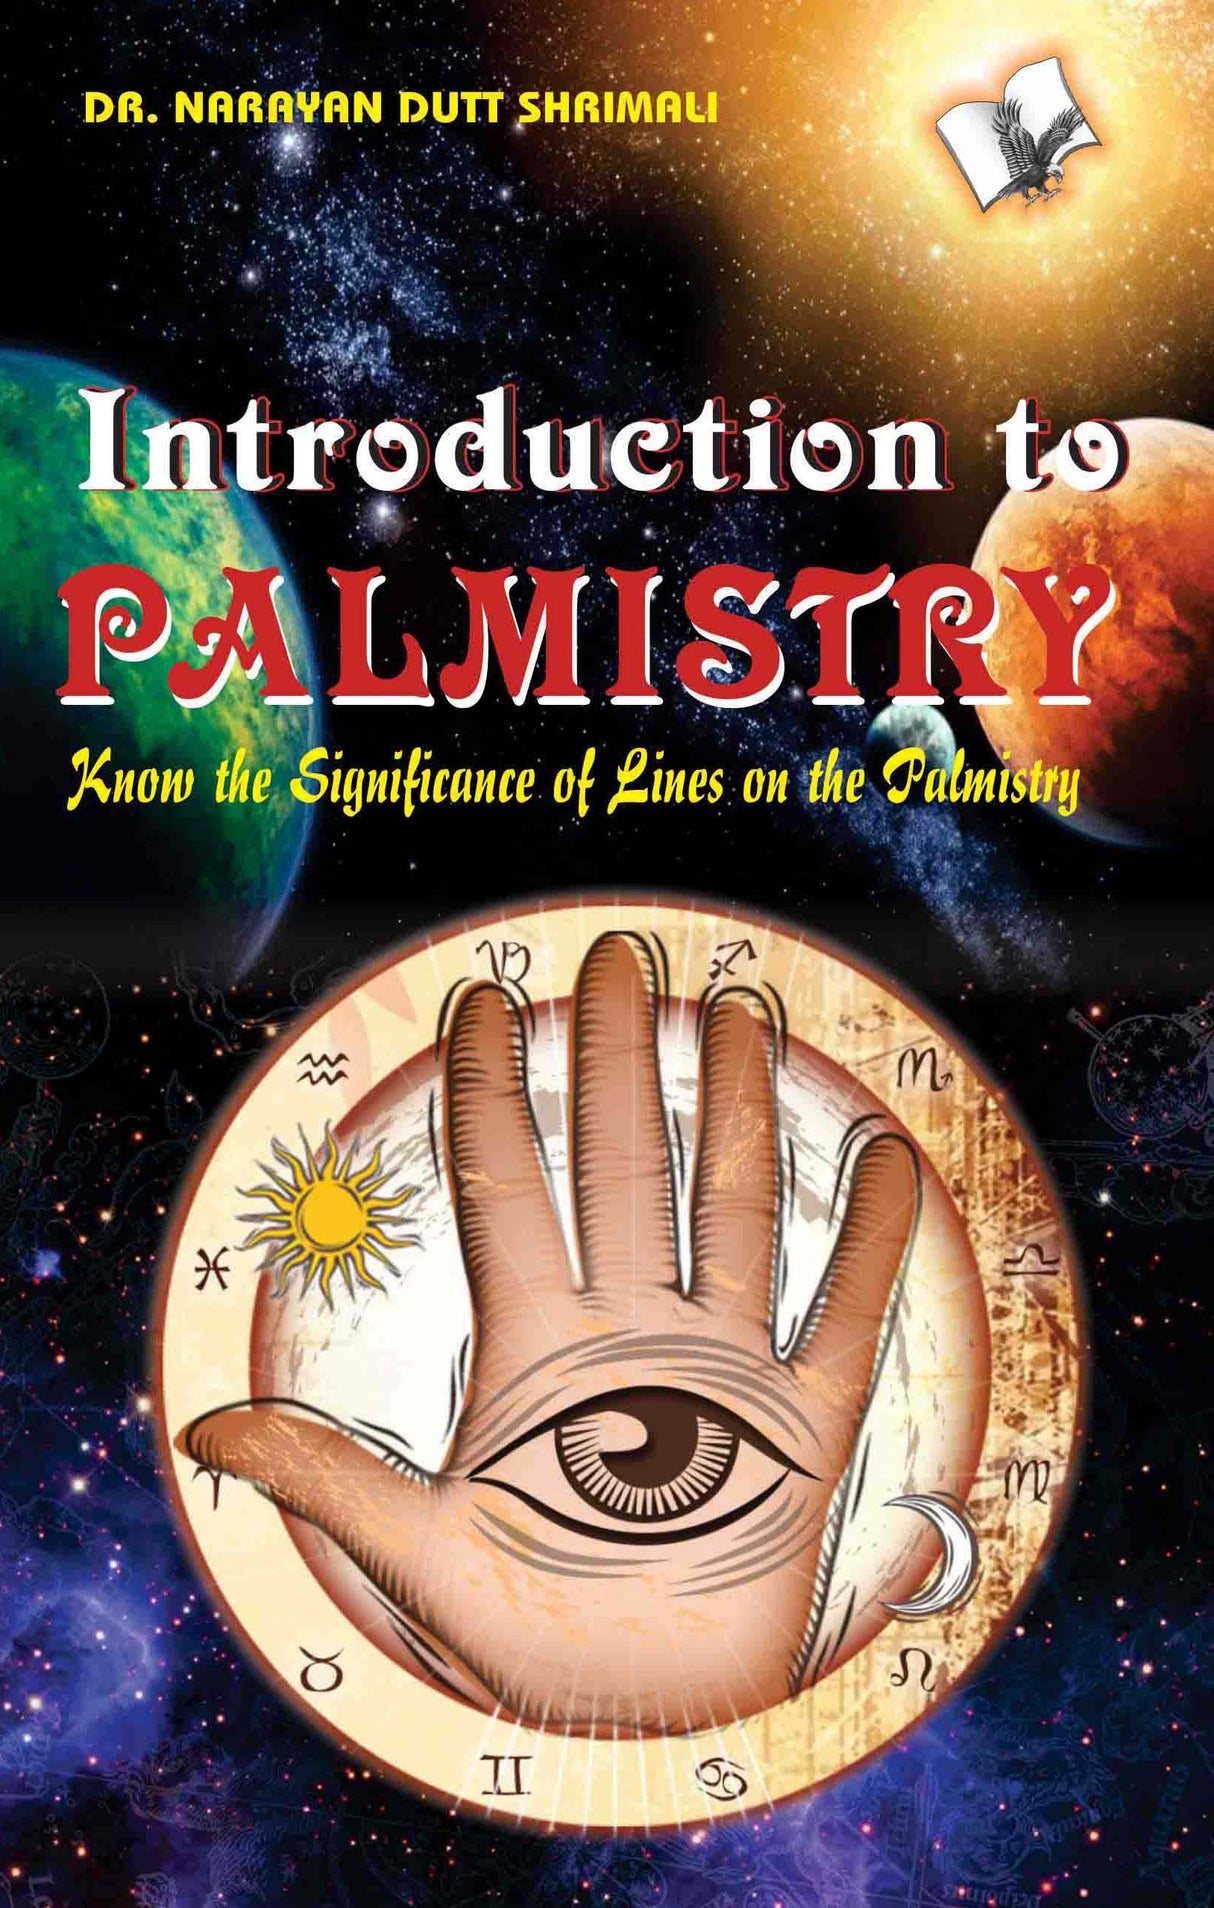 Introduction to Palmistry : Know the Significance of Lines on the Palmistry